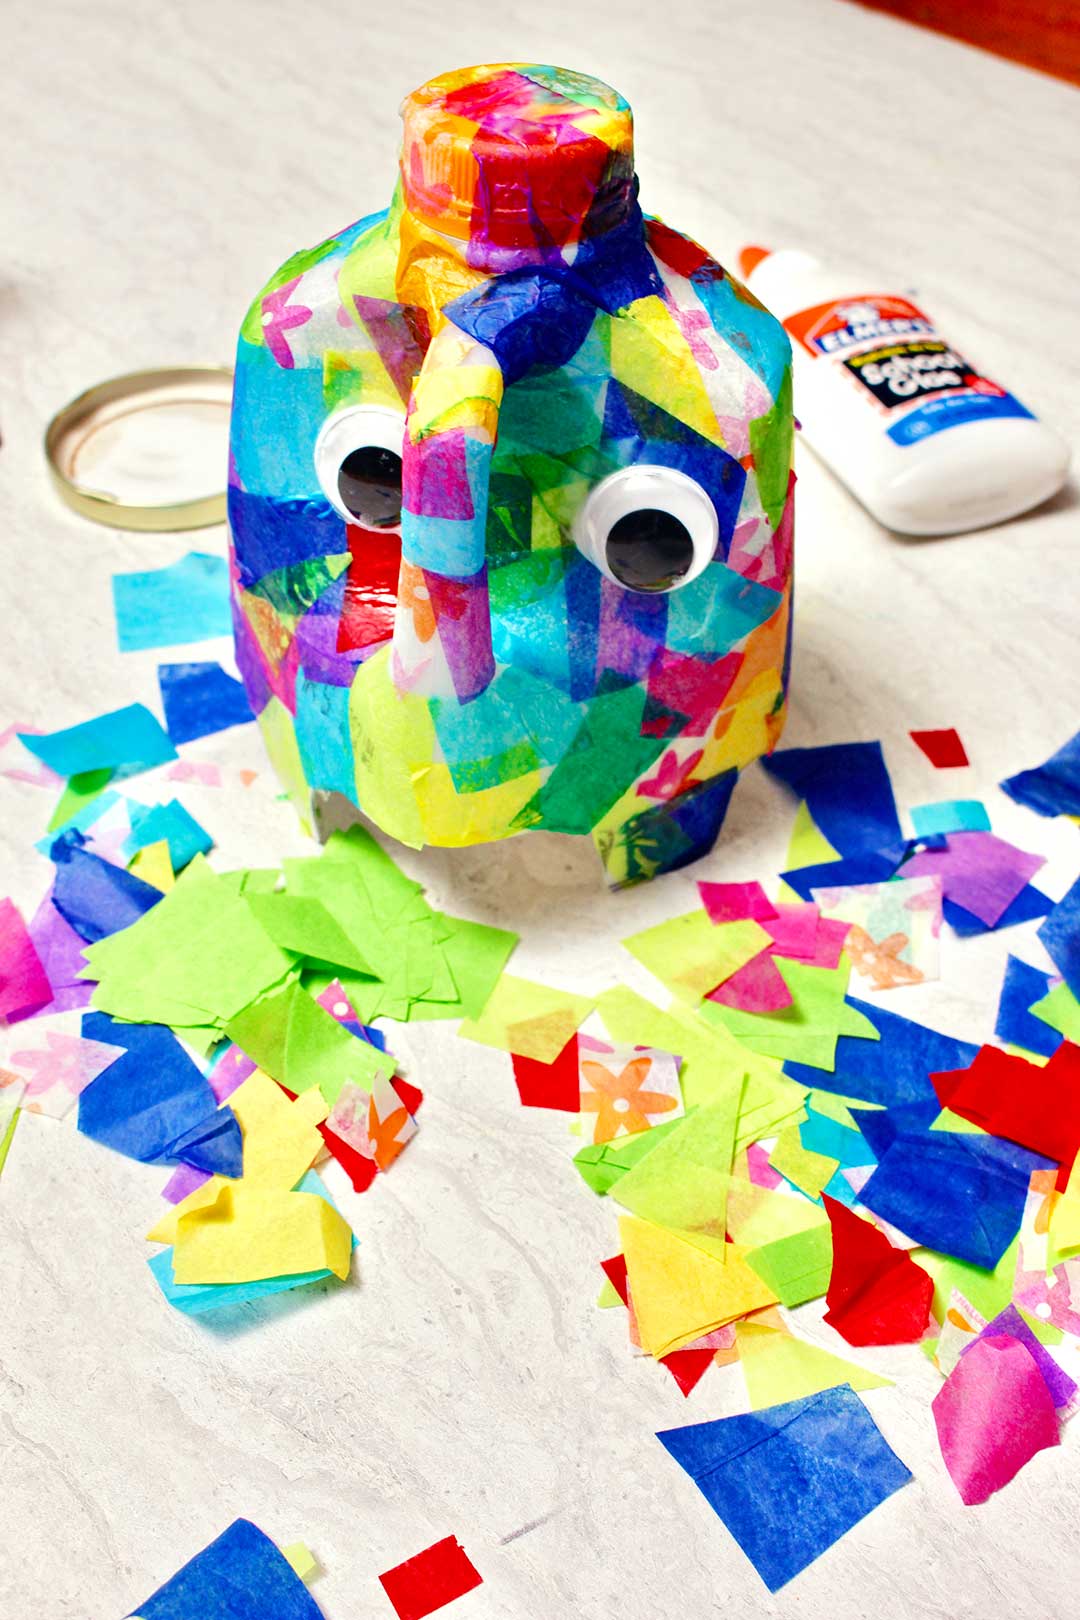 Semi complete elephant craft with many colorful pieces of cut up tissue paper and glue resting near the project.